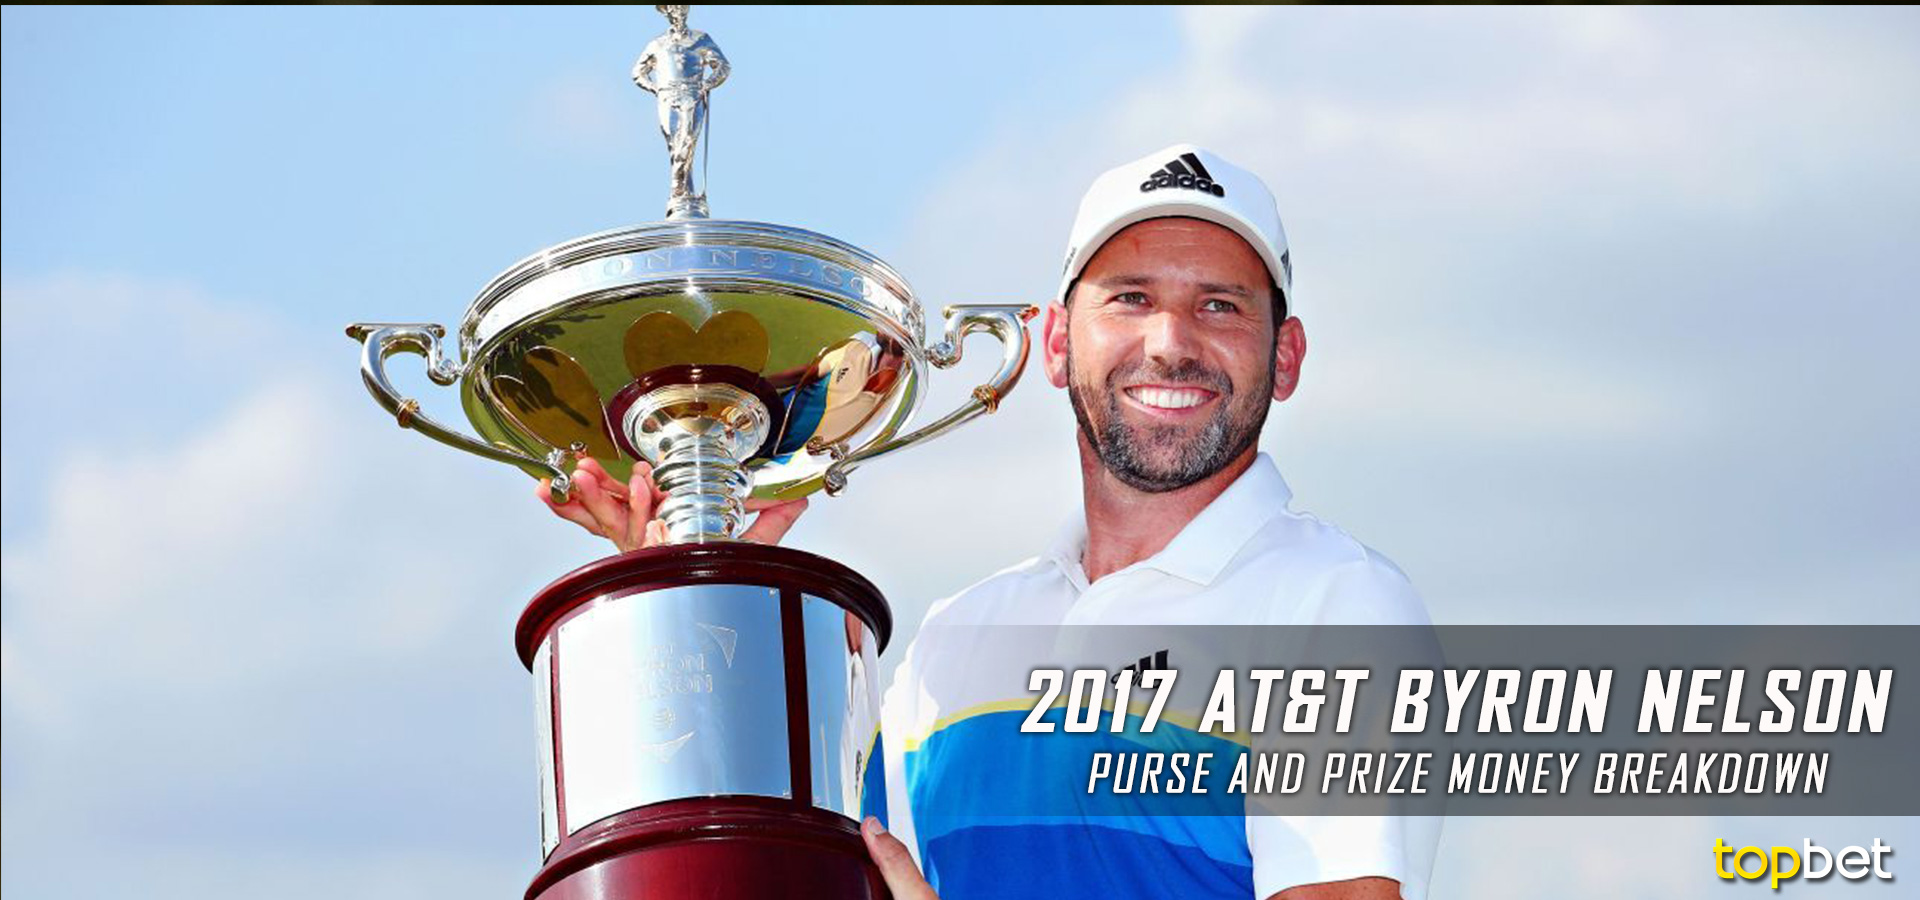 2017 AT&T Byron Nelson Purse and Prize Money Breakdown